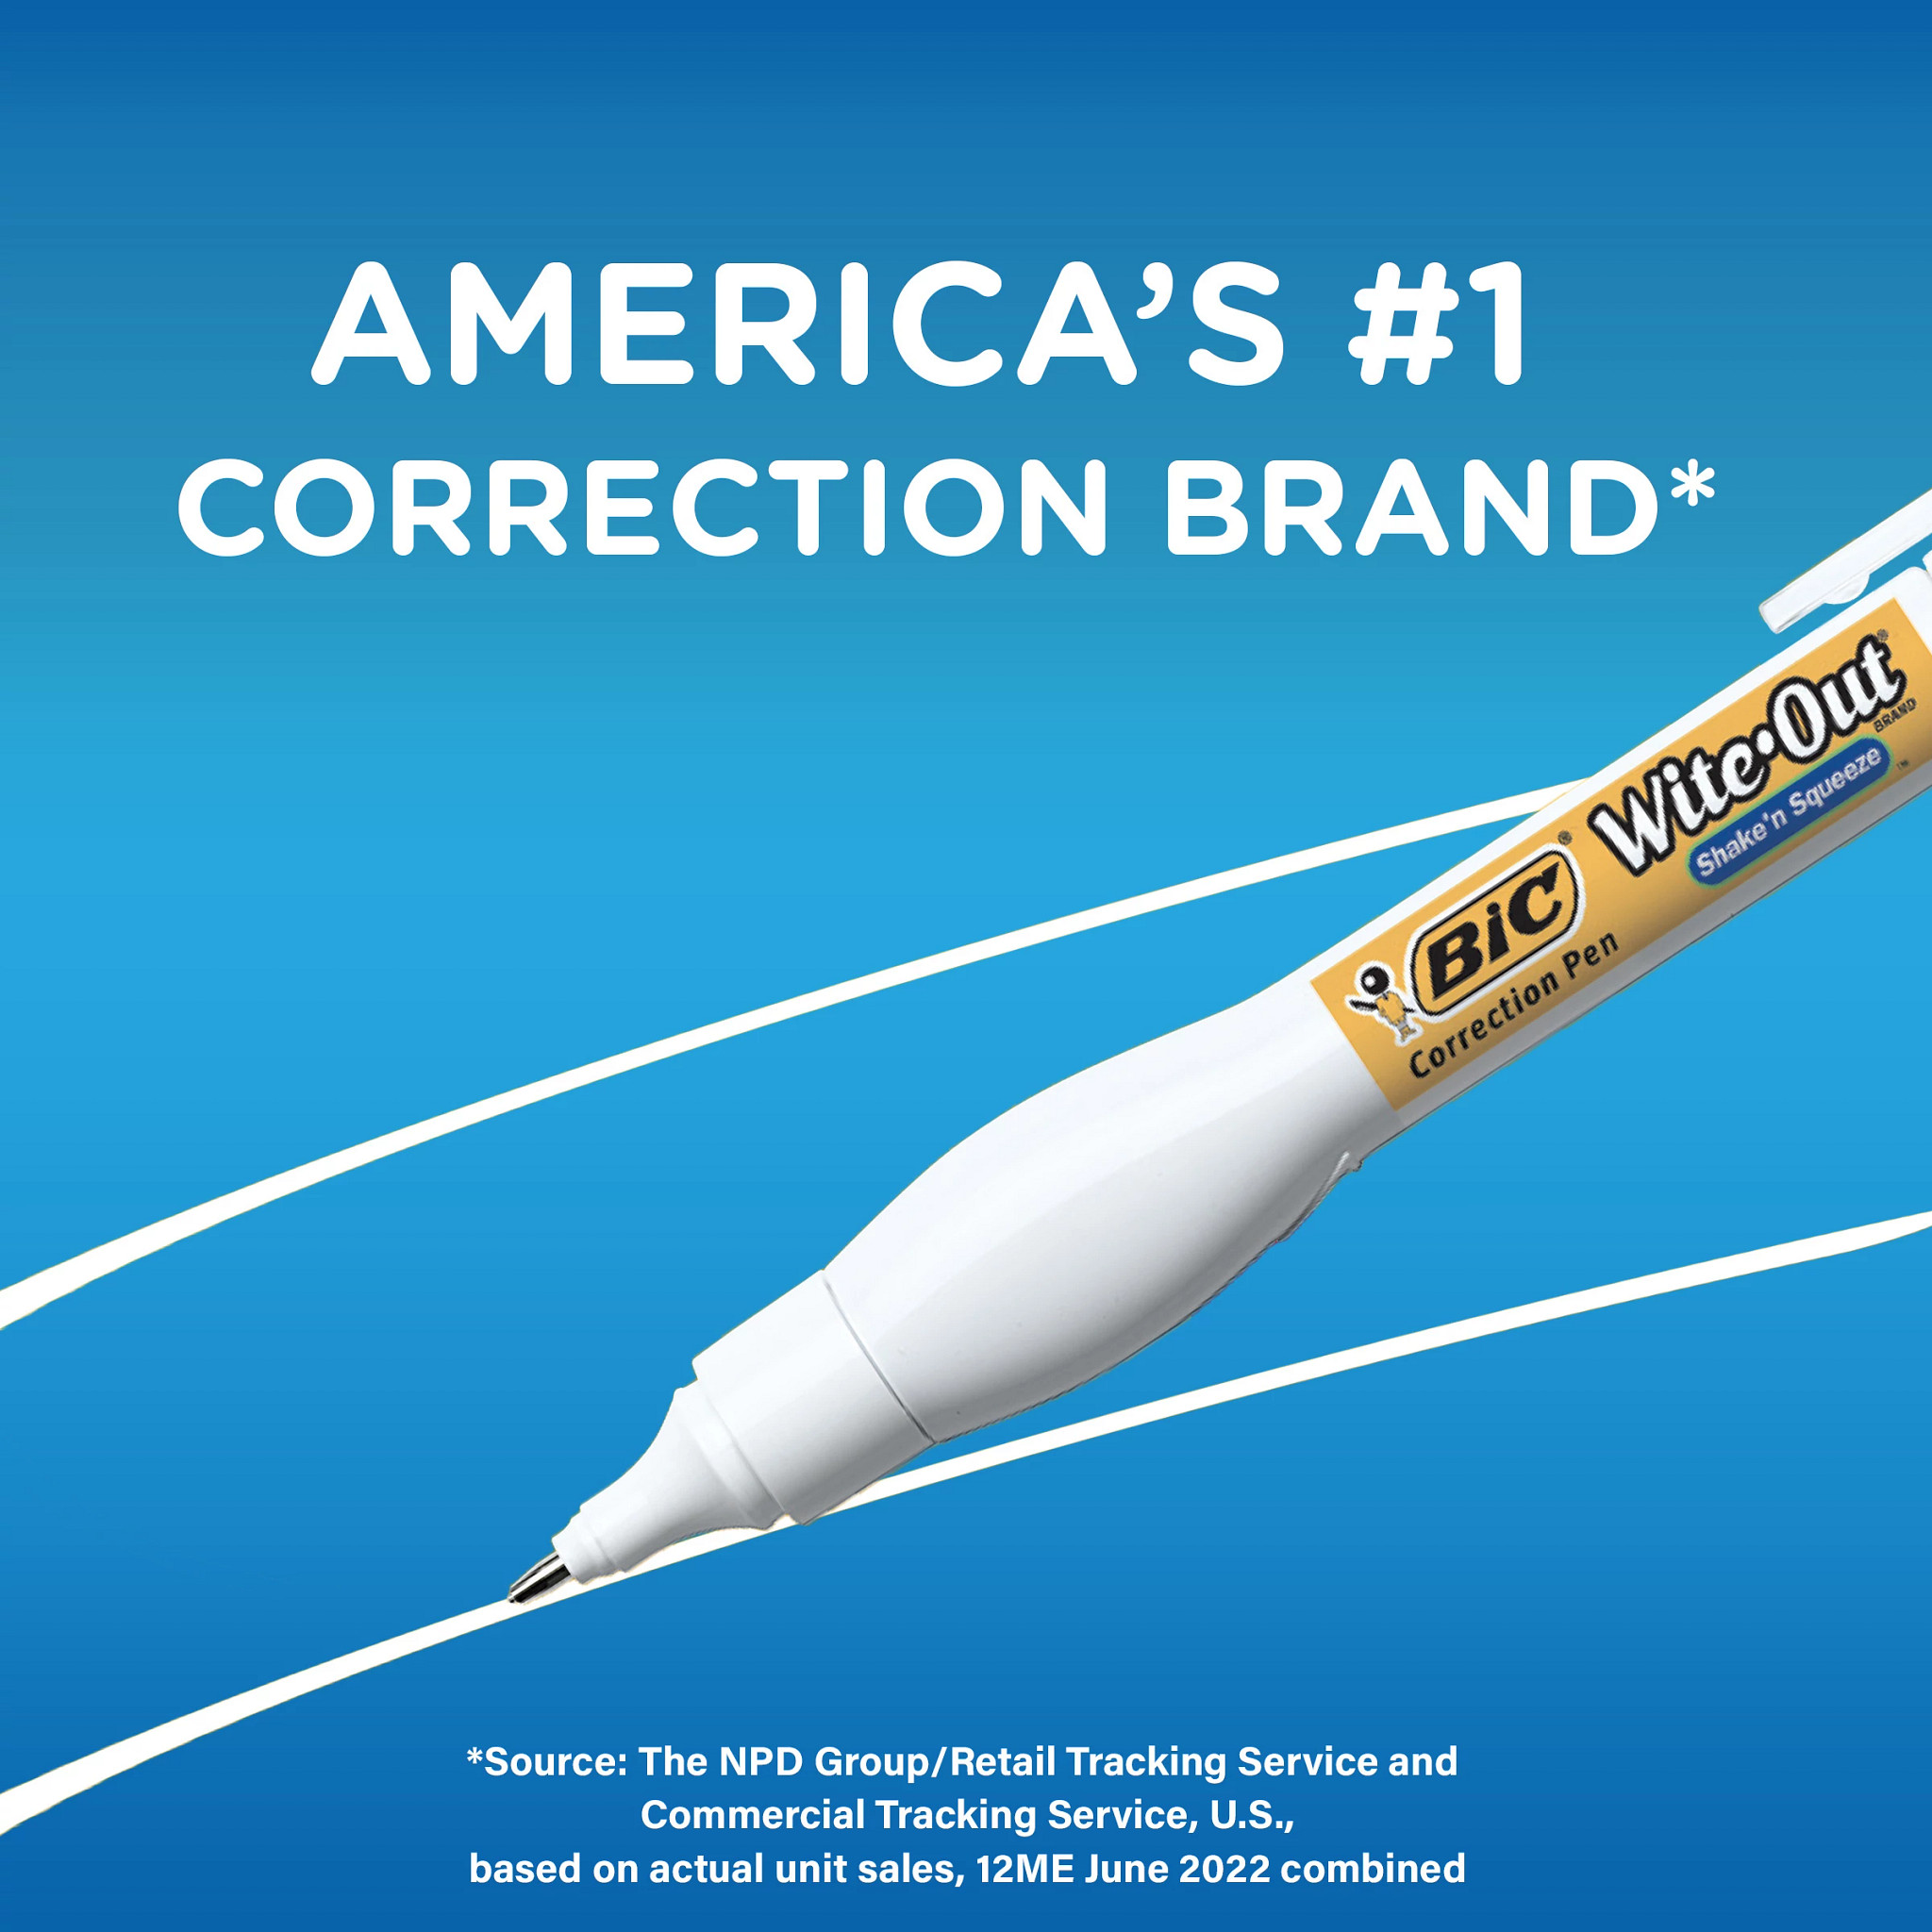 Wite-Out Shake 'n Squeeze Correction Pen by BIC® BICWOSQPP418